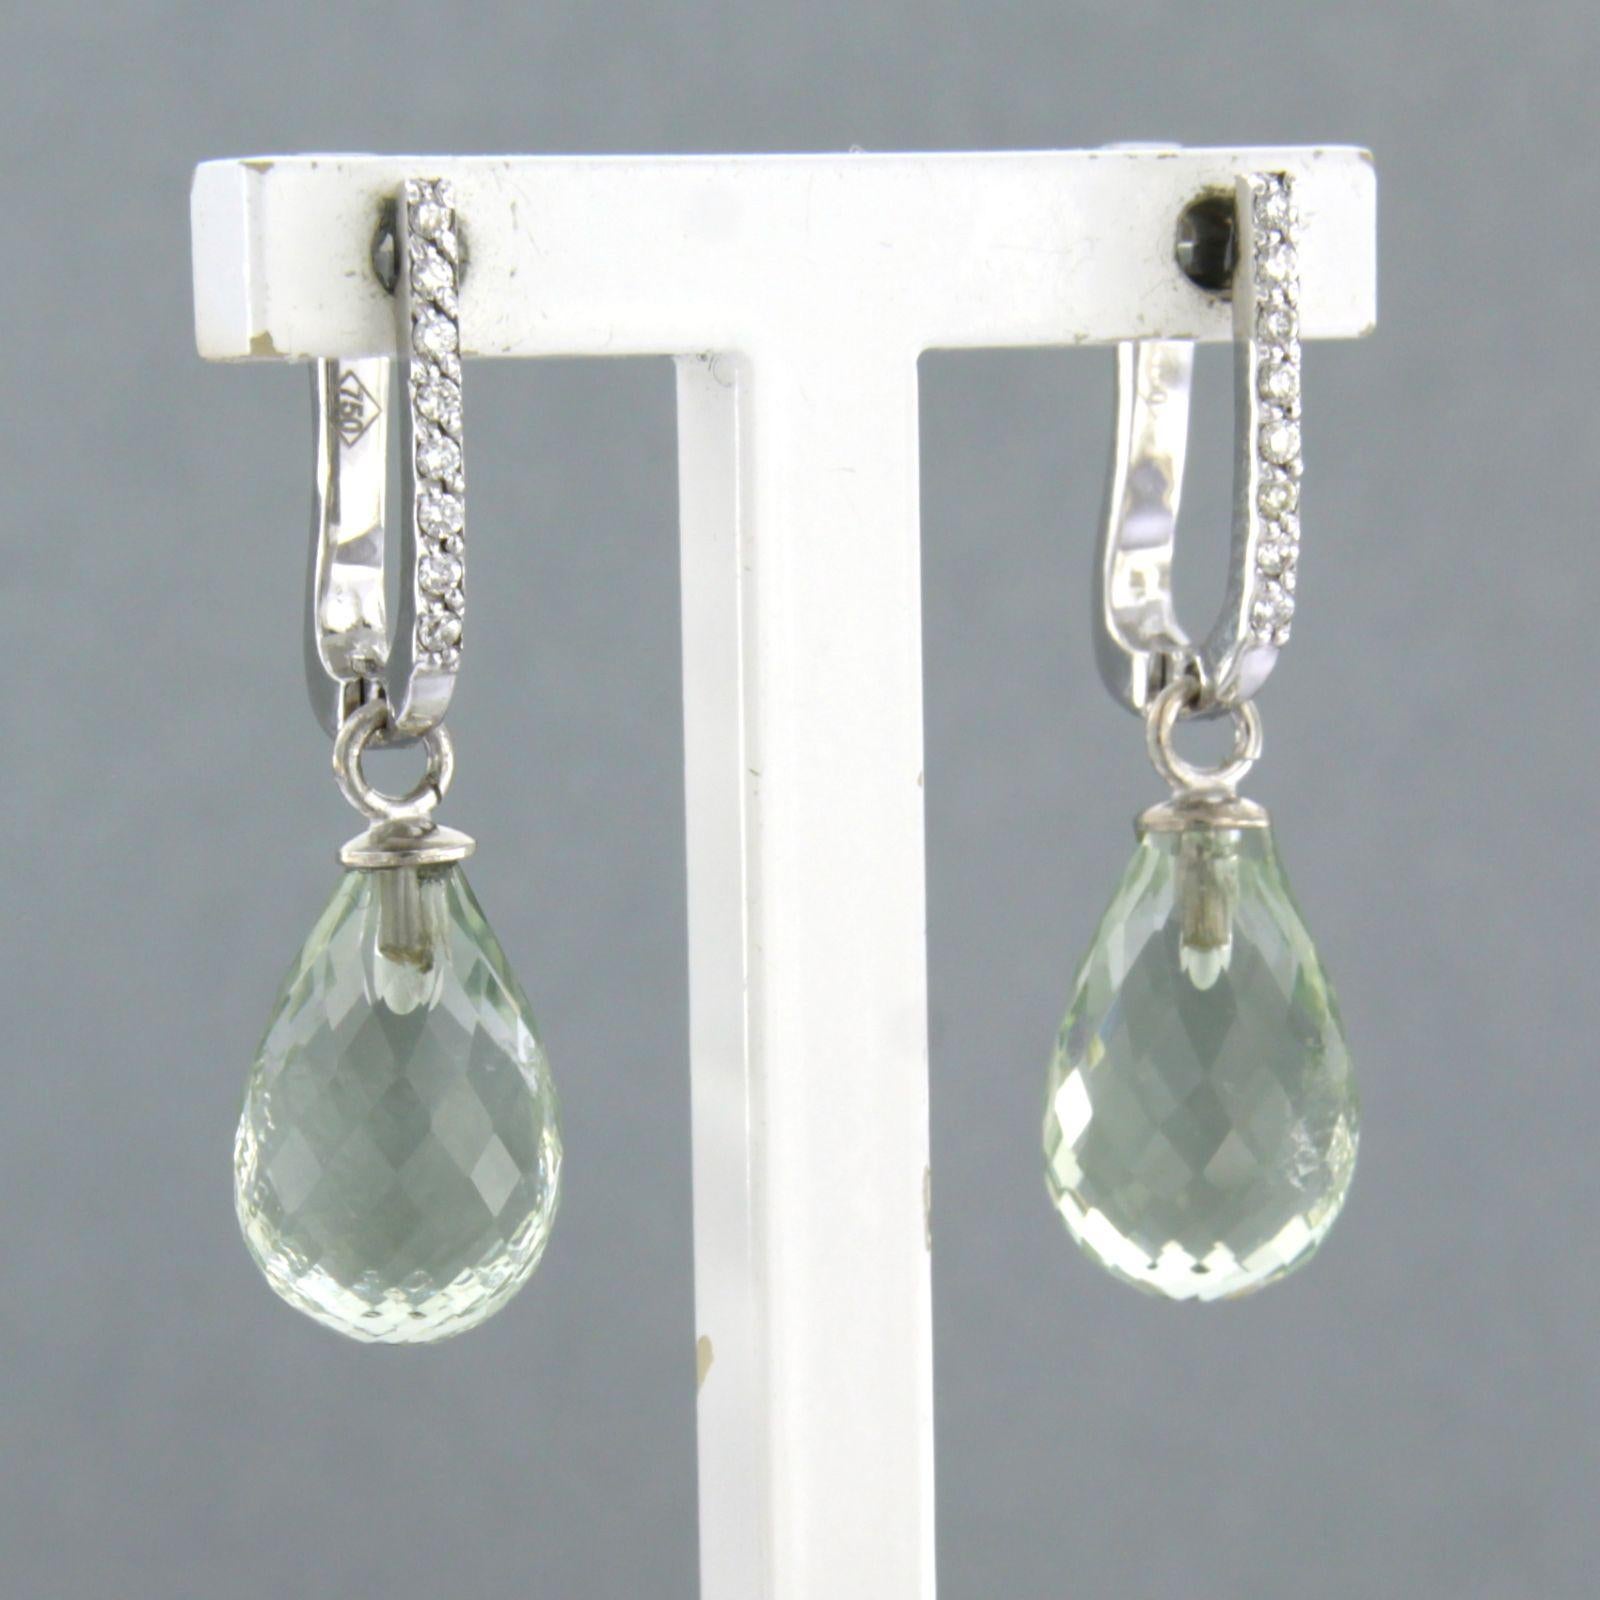 18k white gold earrings set with green amethyst and brilliant cut diamonds. 0.10ct - F/G – VS/SI

Detailed description:

the size of the earring is 2.8 cm long by 8.0 mm wide

Total weight 4.2 grams

set with

- 2 x 1.2 cm x 8.0 mm drop shape facet